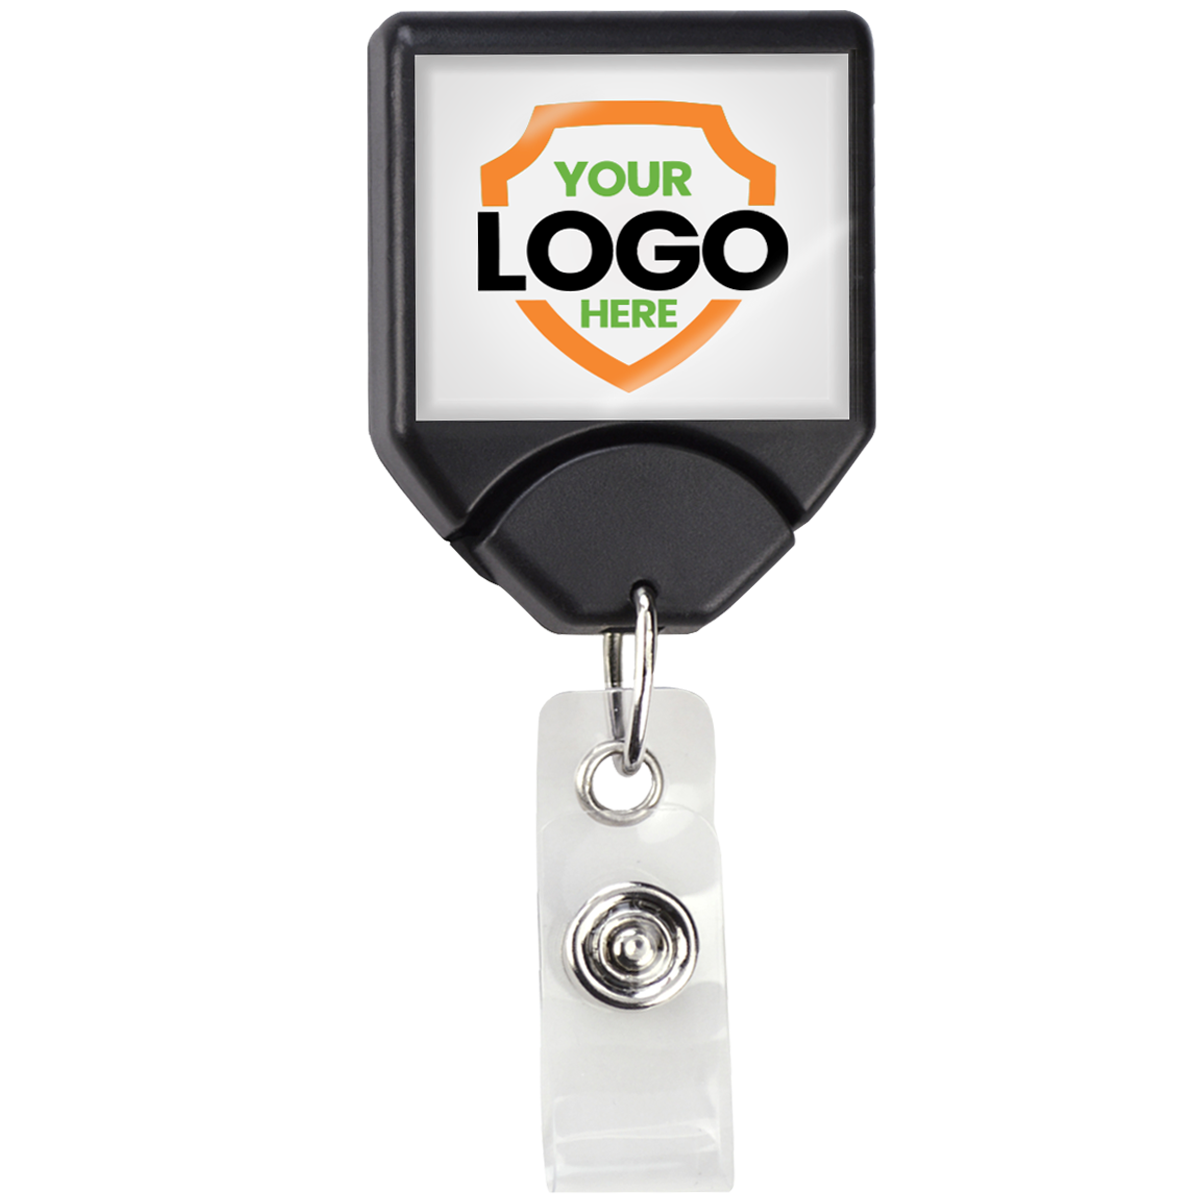 Custom Printed Retractable Badge Reels with Belt Clip - Personalize with Your Brand Logo